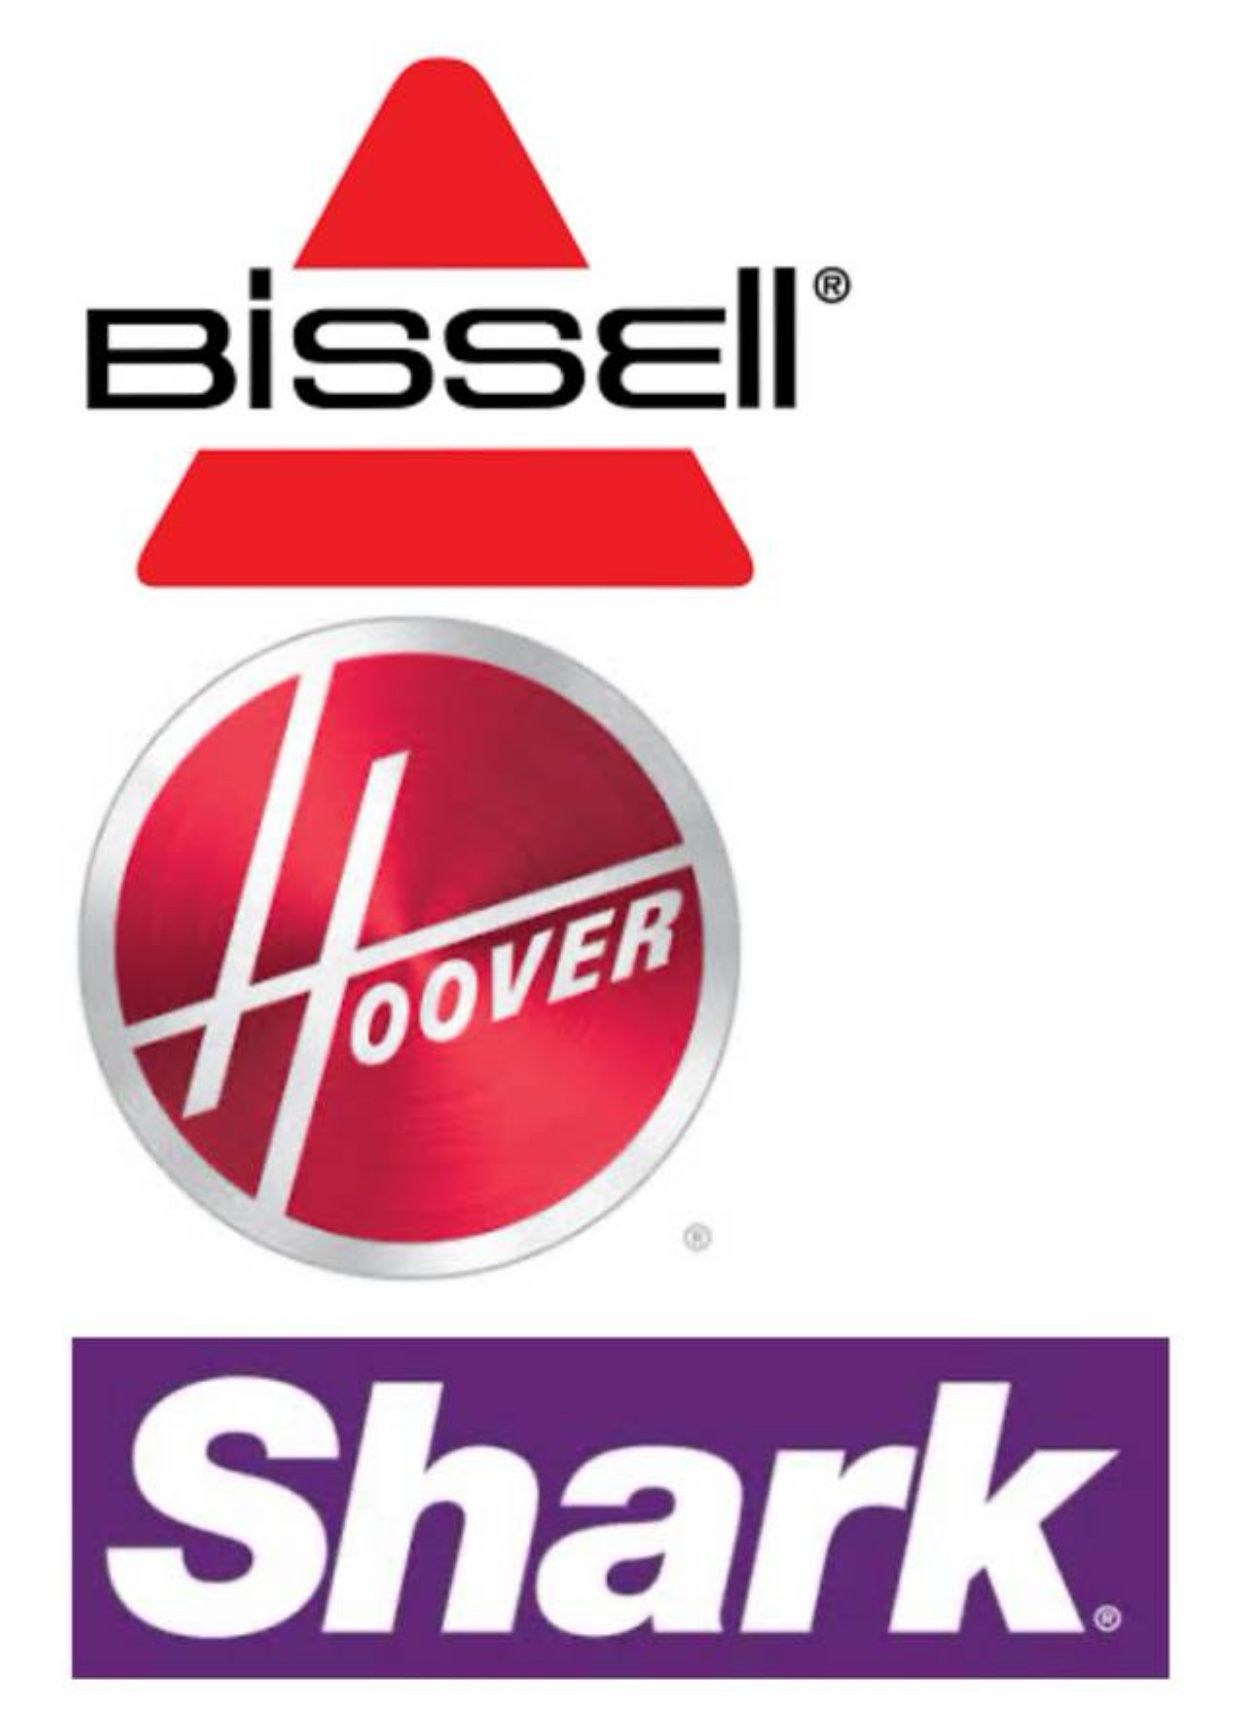 New genuine replacement parts & accessories for Hoover Shark Bissell Oreck vacuums and carpet cleaners